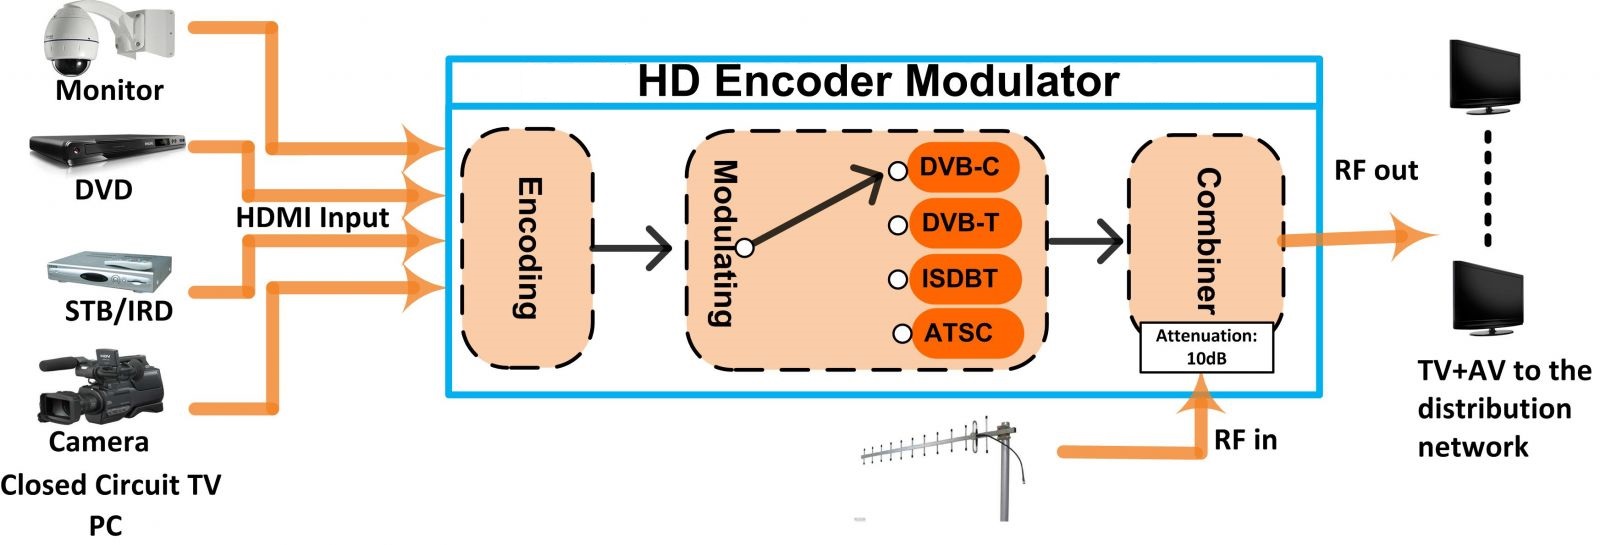 how to connect hdmi rf moduator.jpg